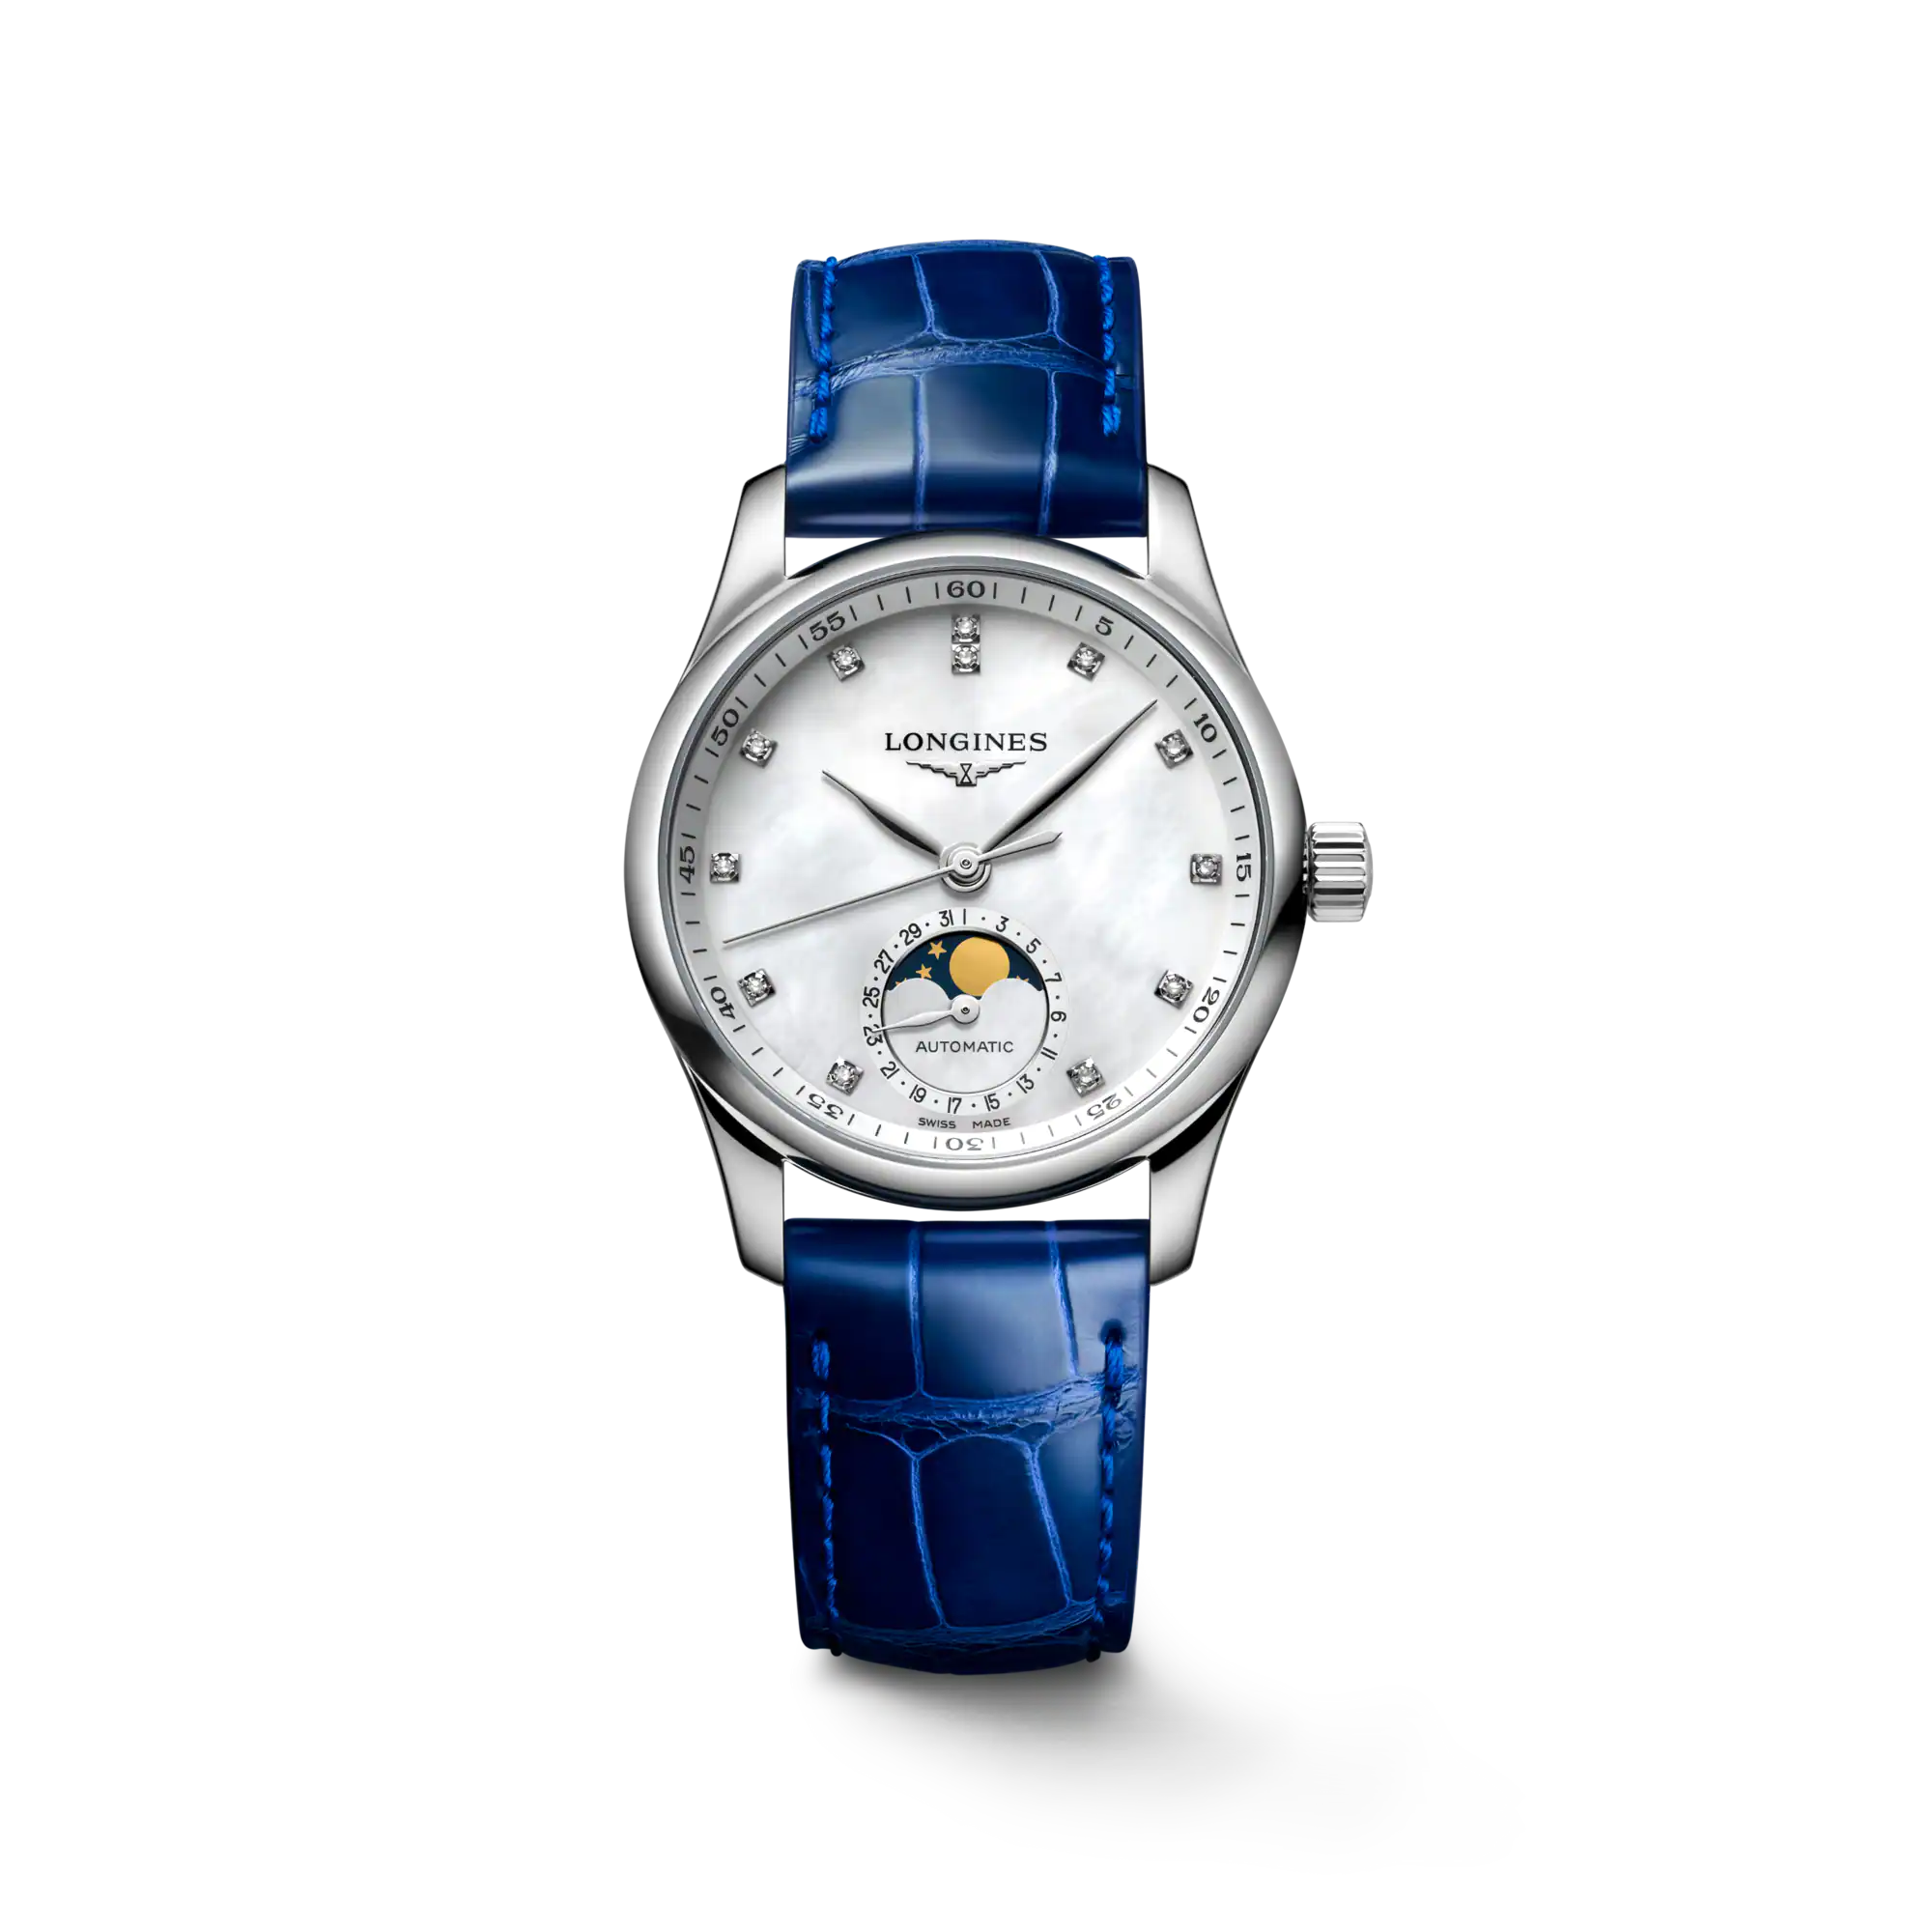 The Longines Master Collection Automatic Women's Watch L24094870